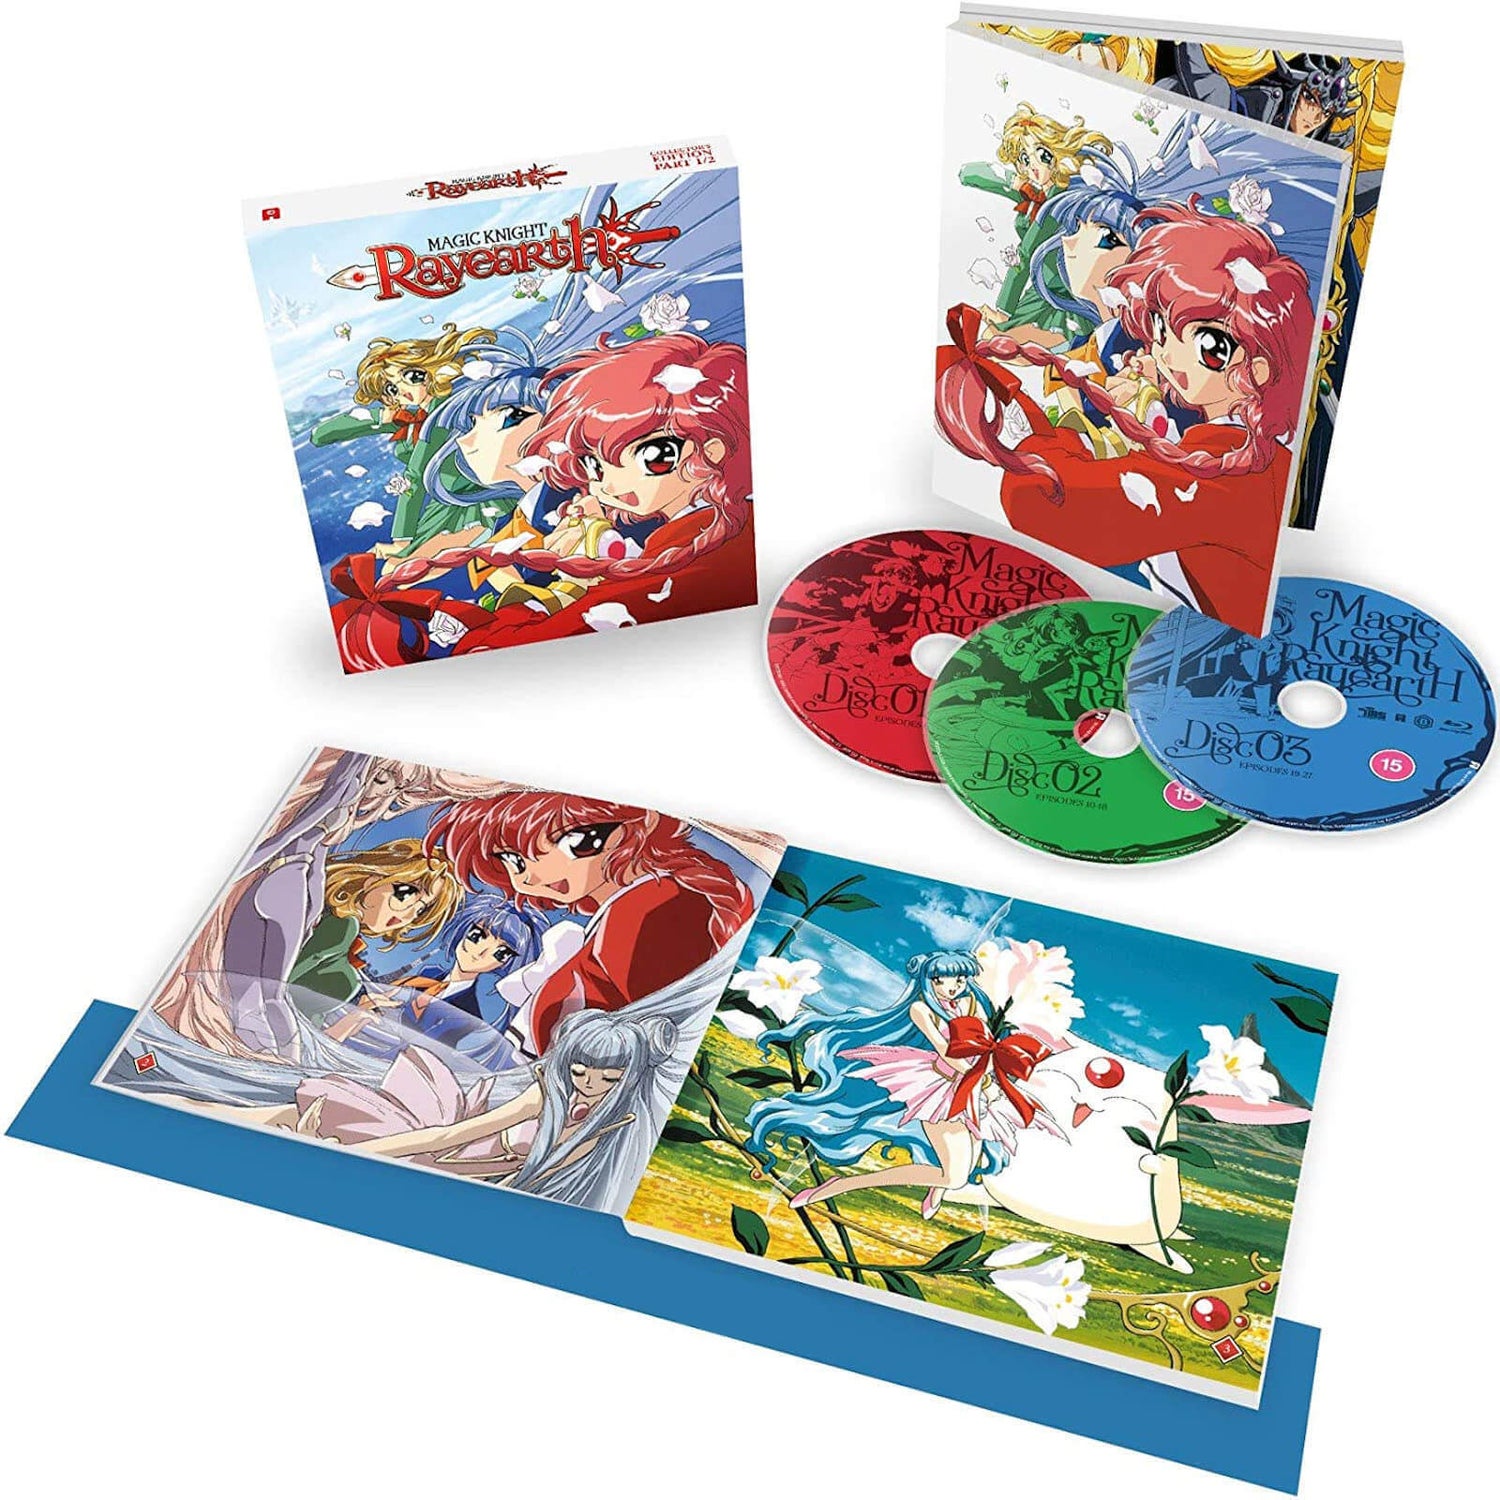 Magic Knight Rayearth Part 1 Collector's Edition